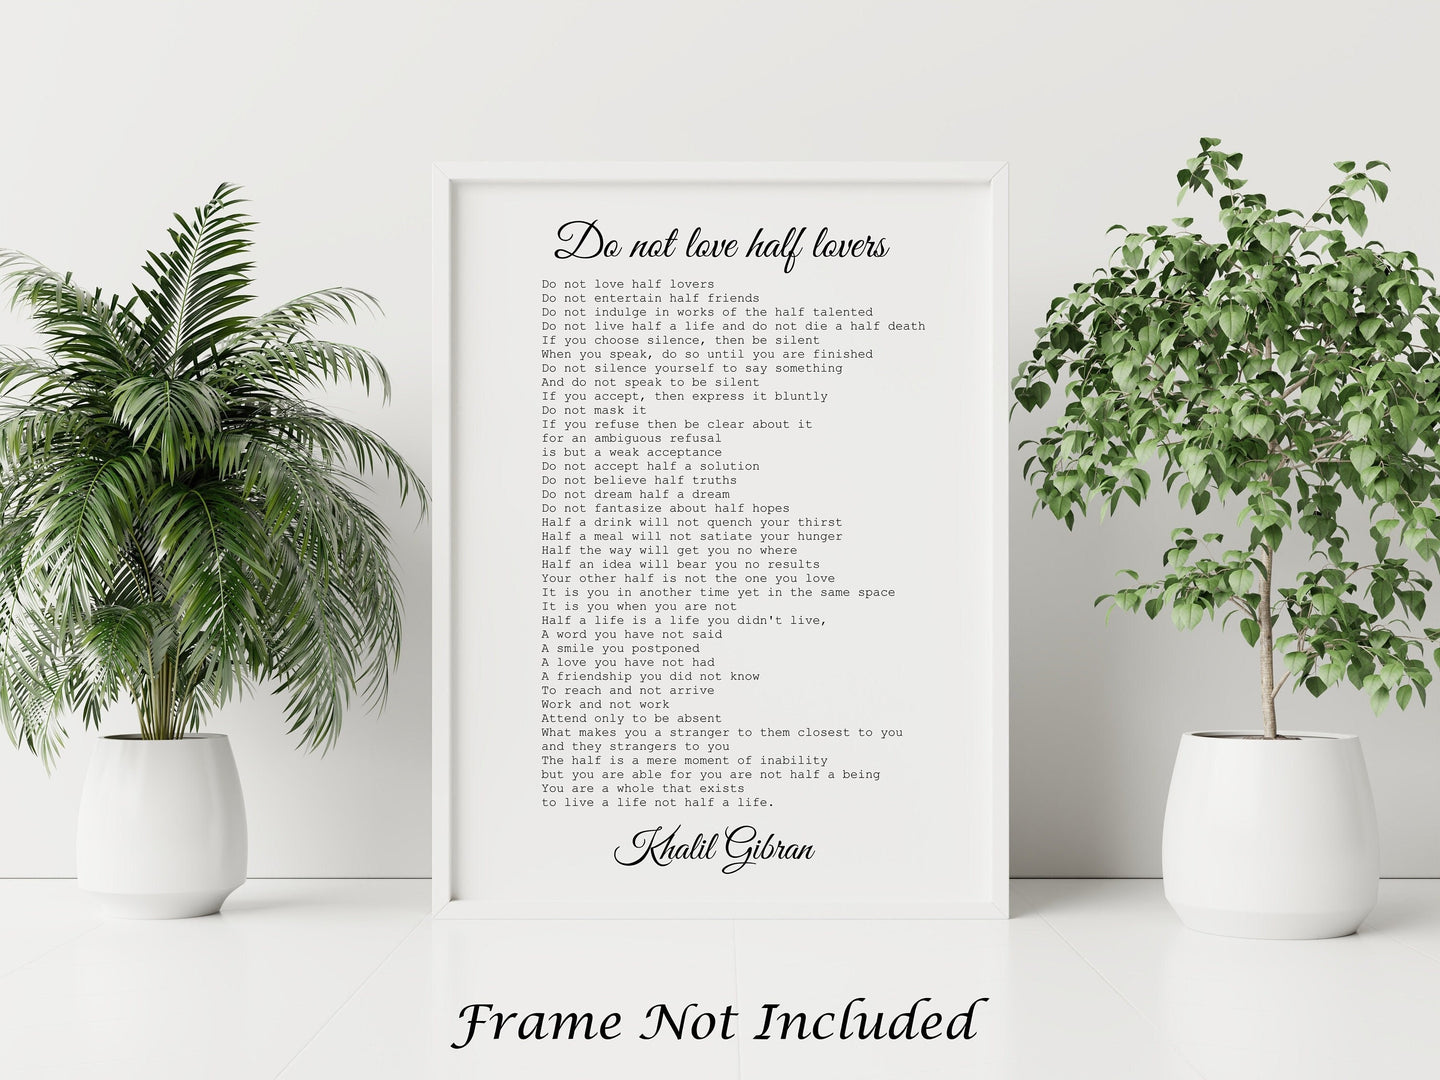 Do Not Love Half Lovers by Kahlil Gibran Poem - Black & White Wall Art Poster Print - Physical Art Print Without Frame